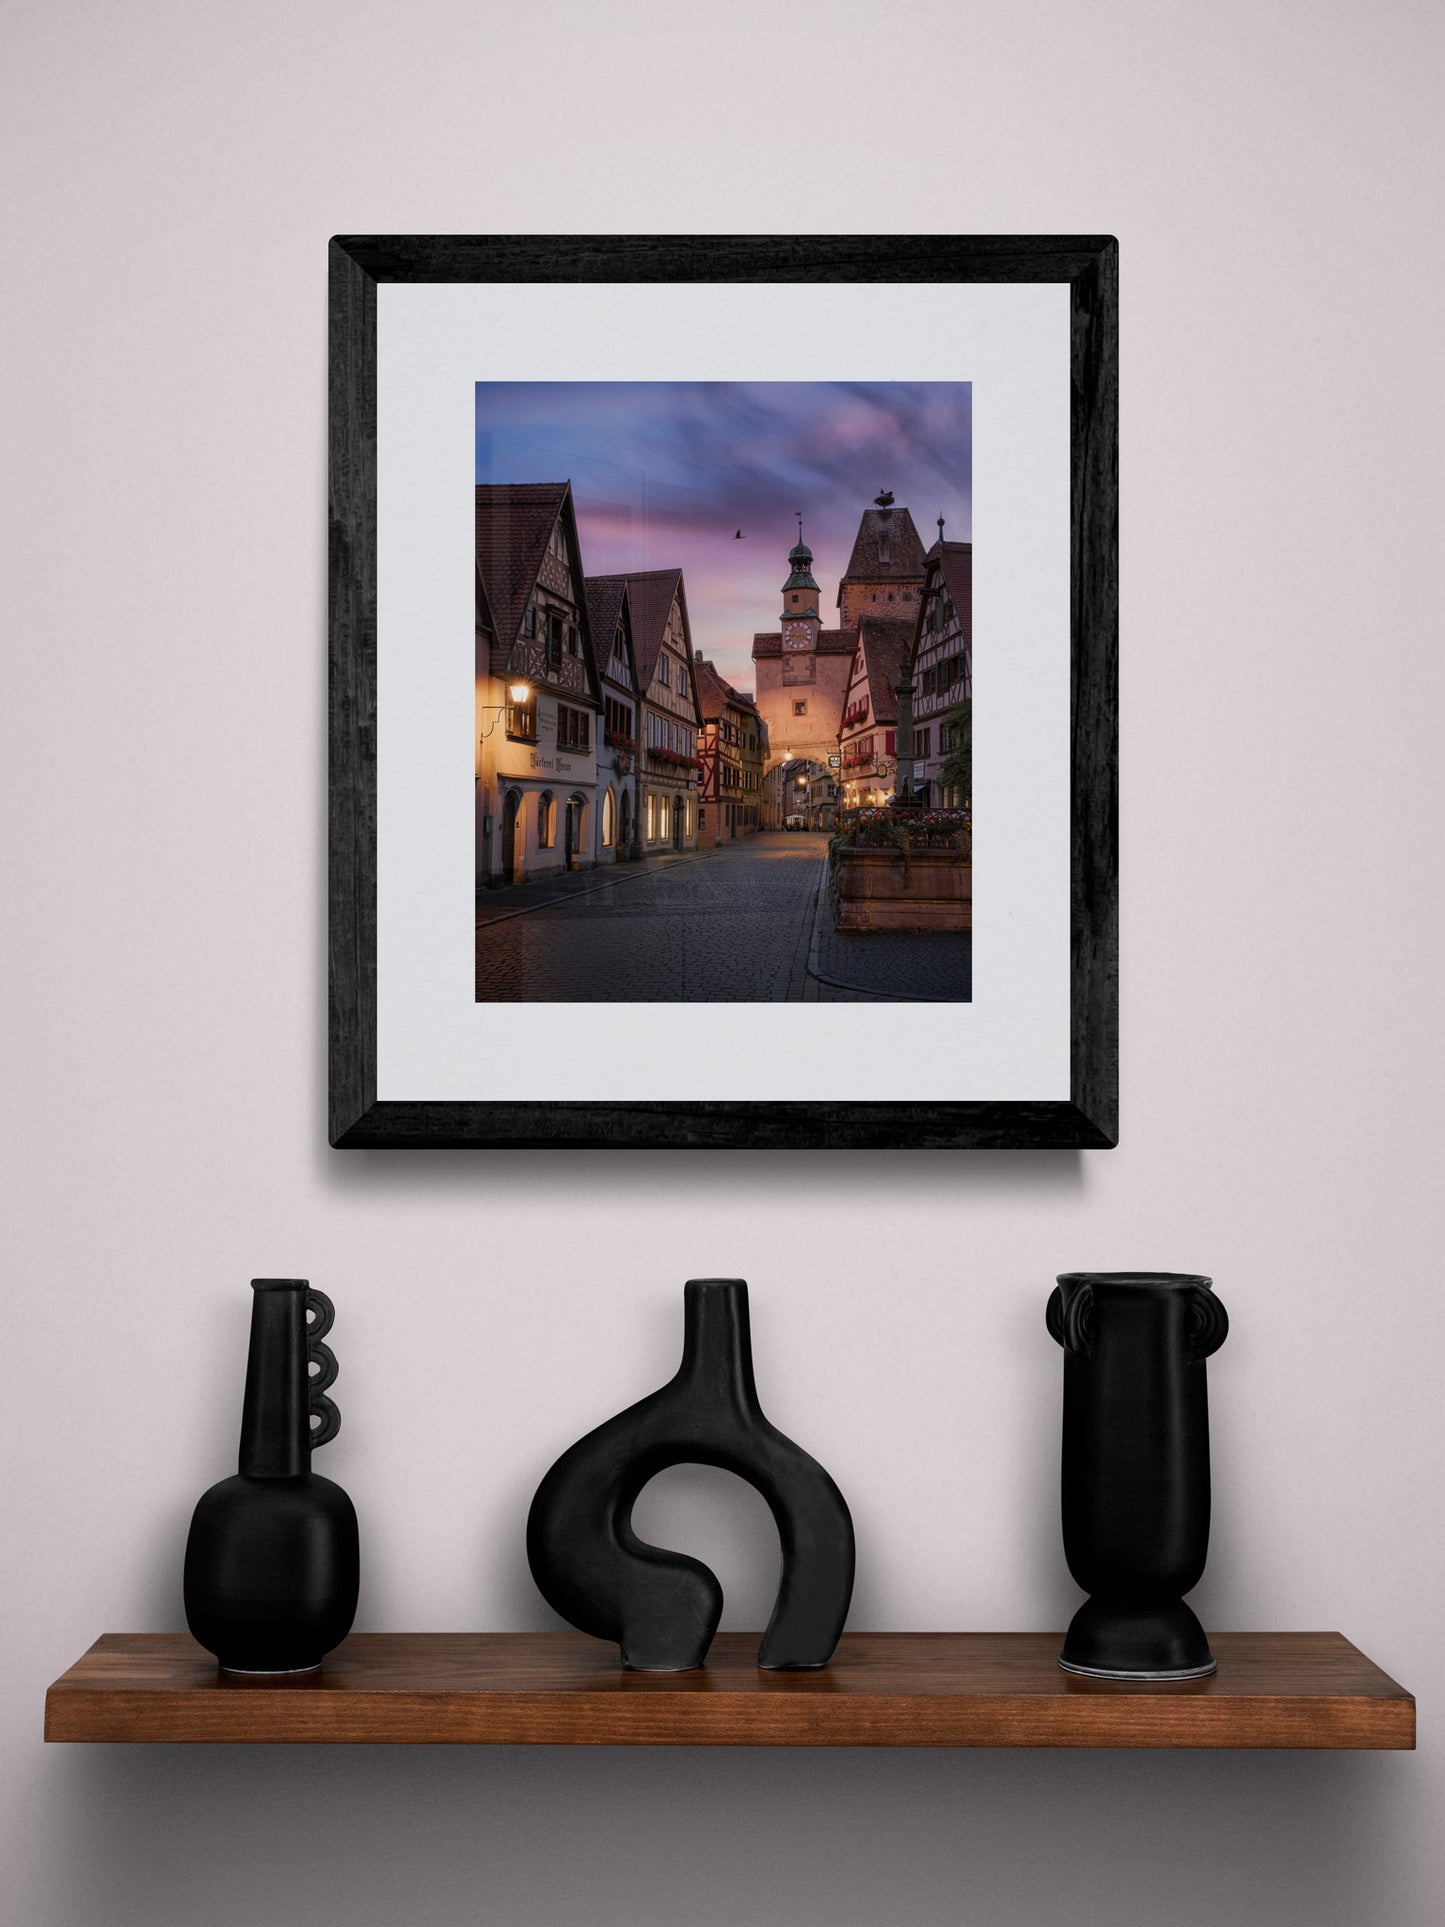 Image Title: Daddy is coming Photographer: Marcus Danz Location: Rothenburg ob der Tauber, Germany  Image description: Beautiful sunset view of the Markus Tower n the romantic town of Rothenburg ob der Tauber. High quality Fine Art print up to 36 inch / around 90 centimeters on Hahnemühle paper available. Small variant over shelf.